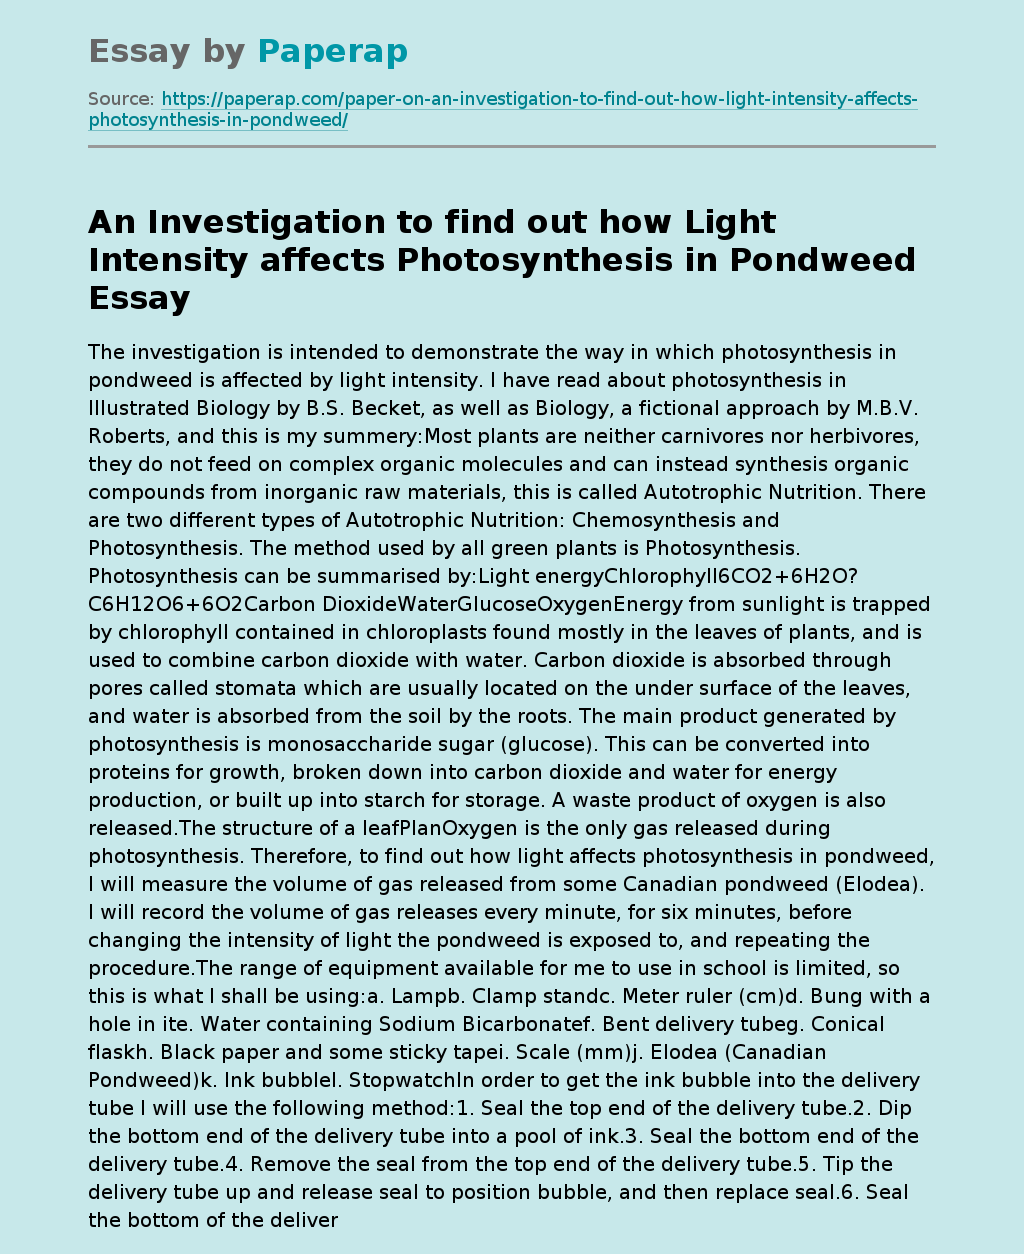 An Investigation to find out how Light Intensity affects Photosynthesis in Pondweed